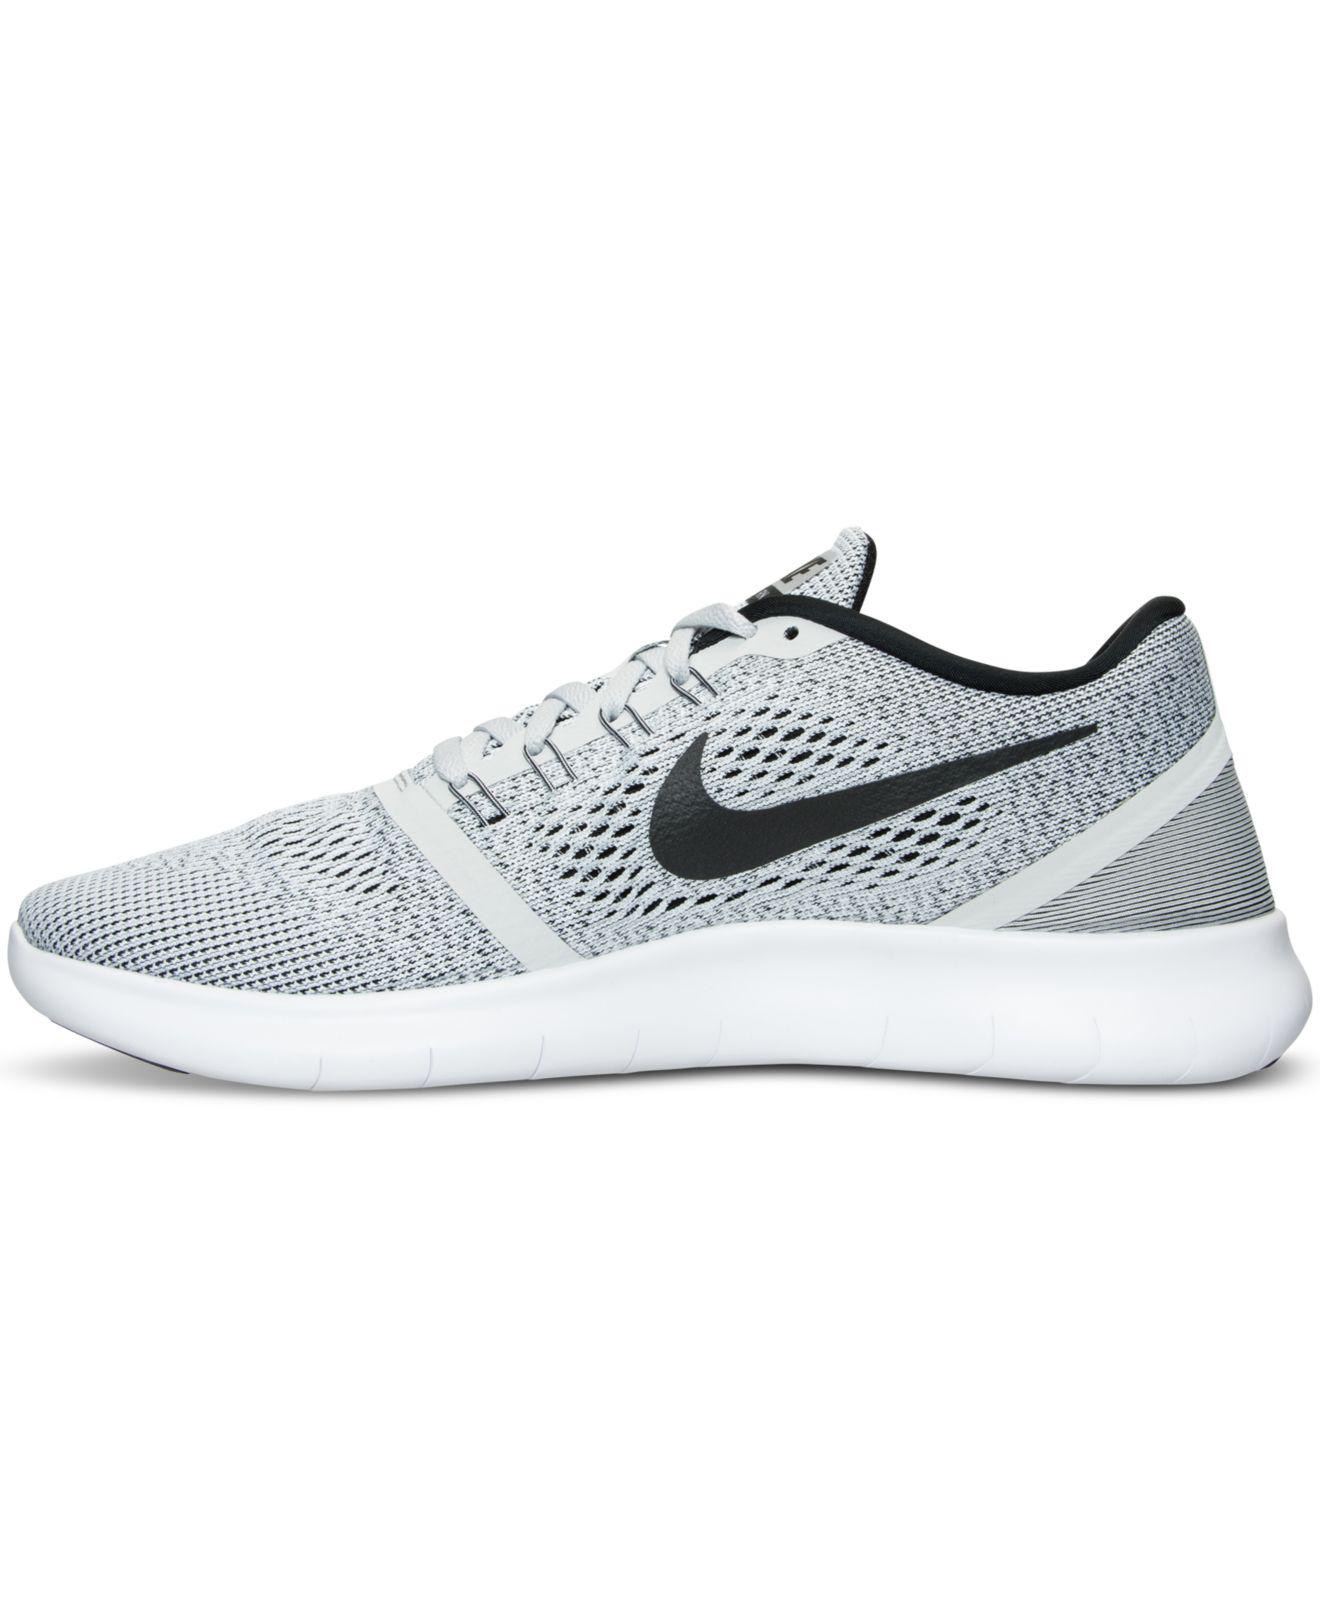 Nike Men's Free Rn Running Sneakers From Finish Line in Gray for Men - Lyst